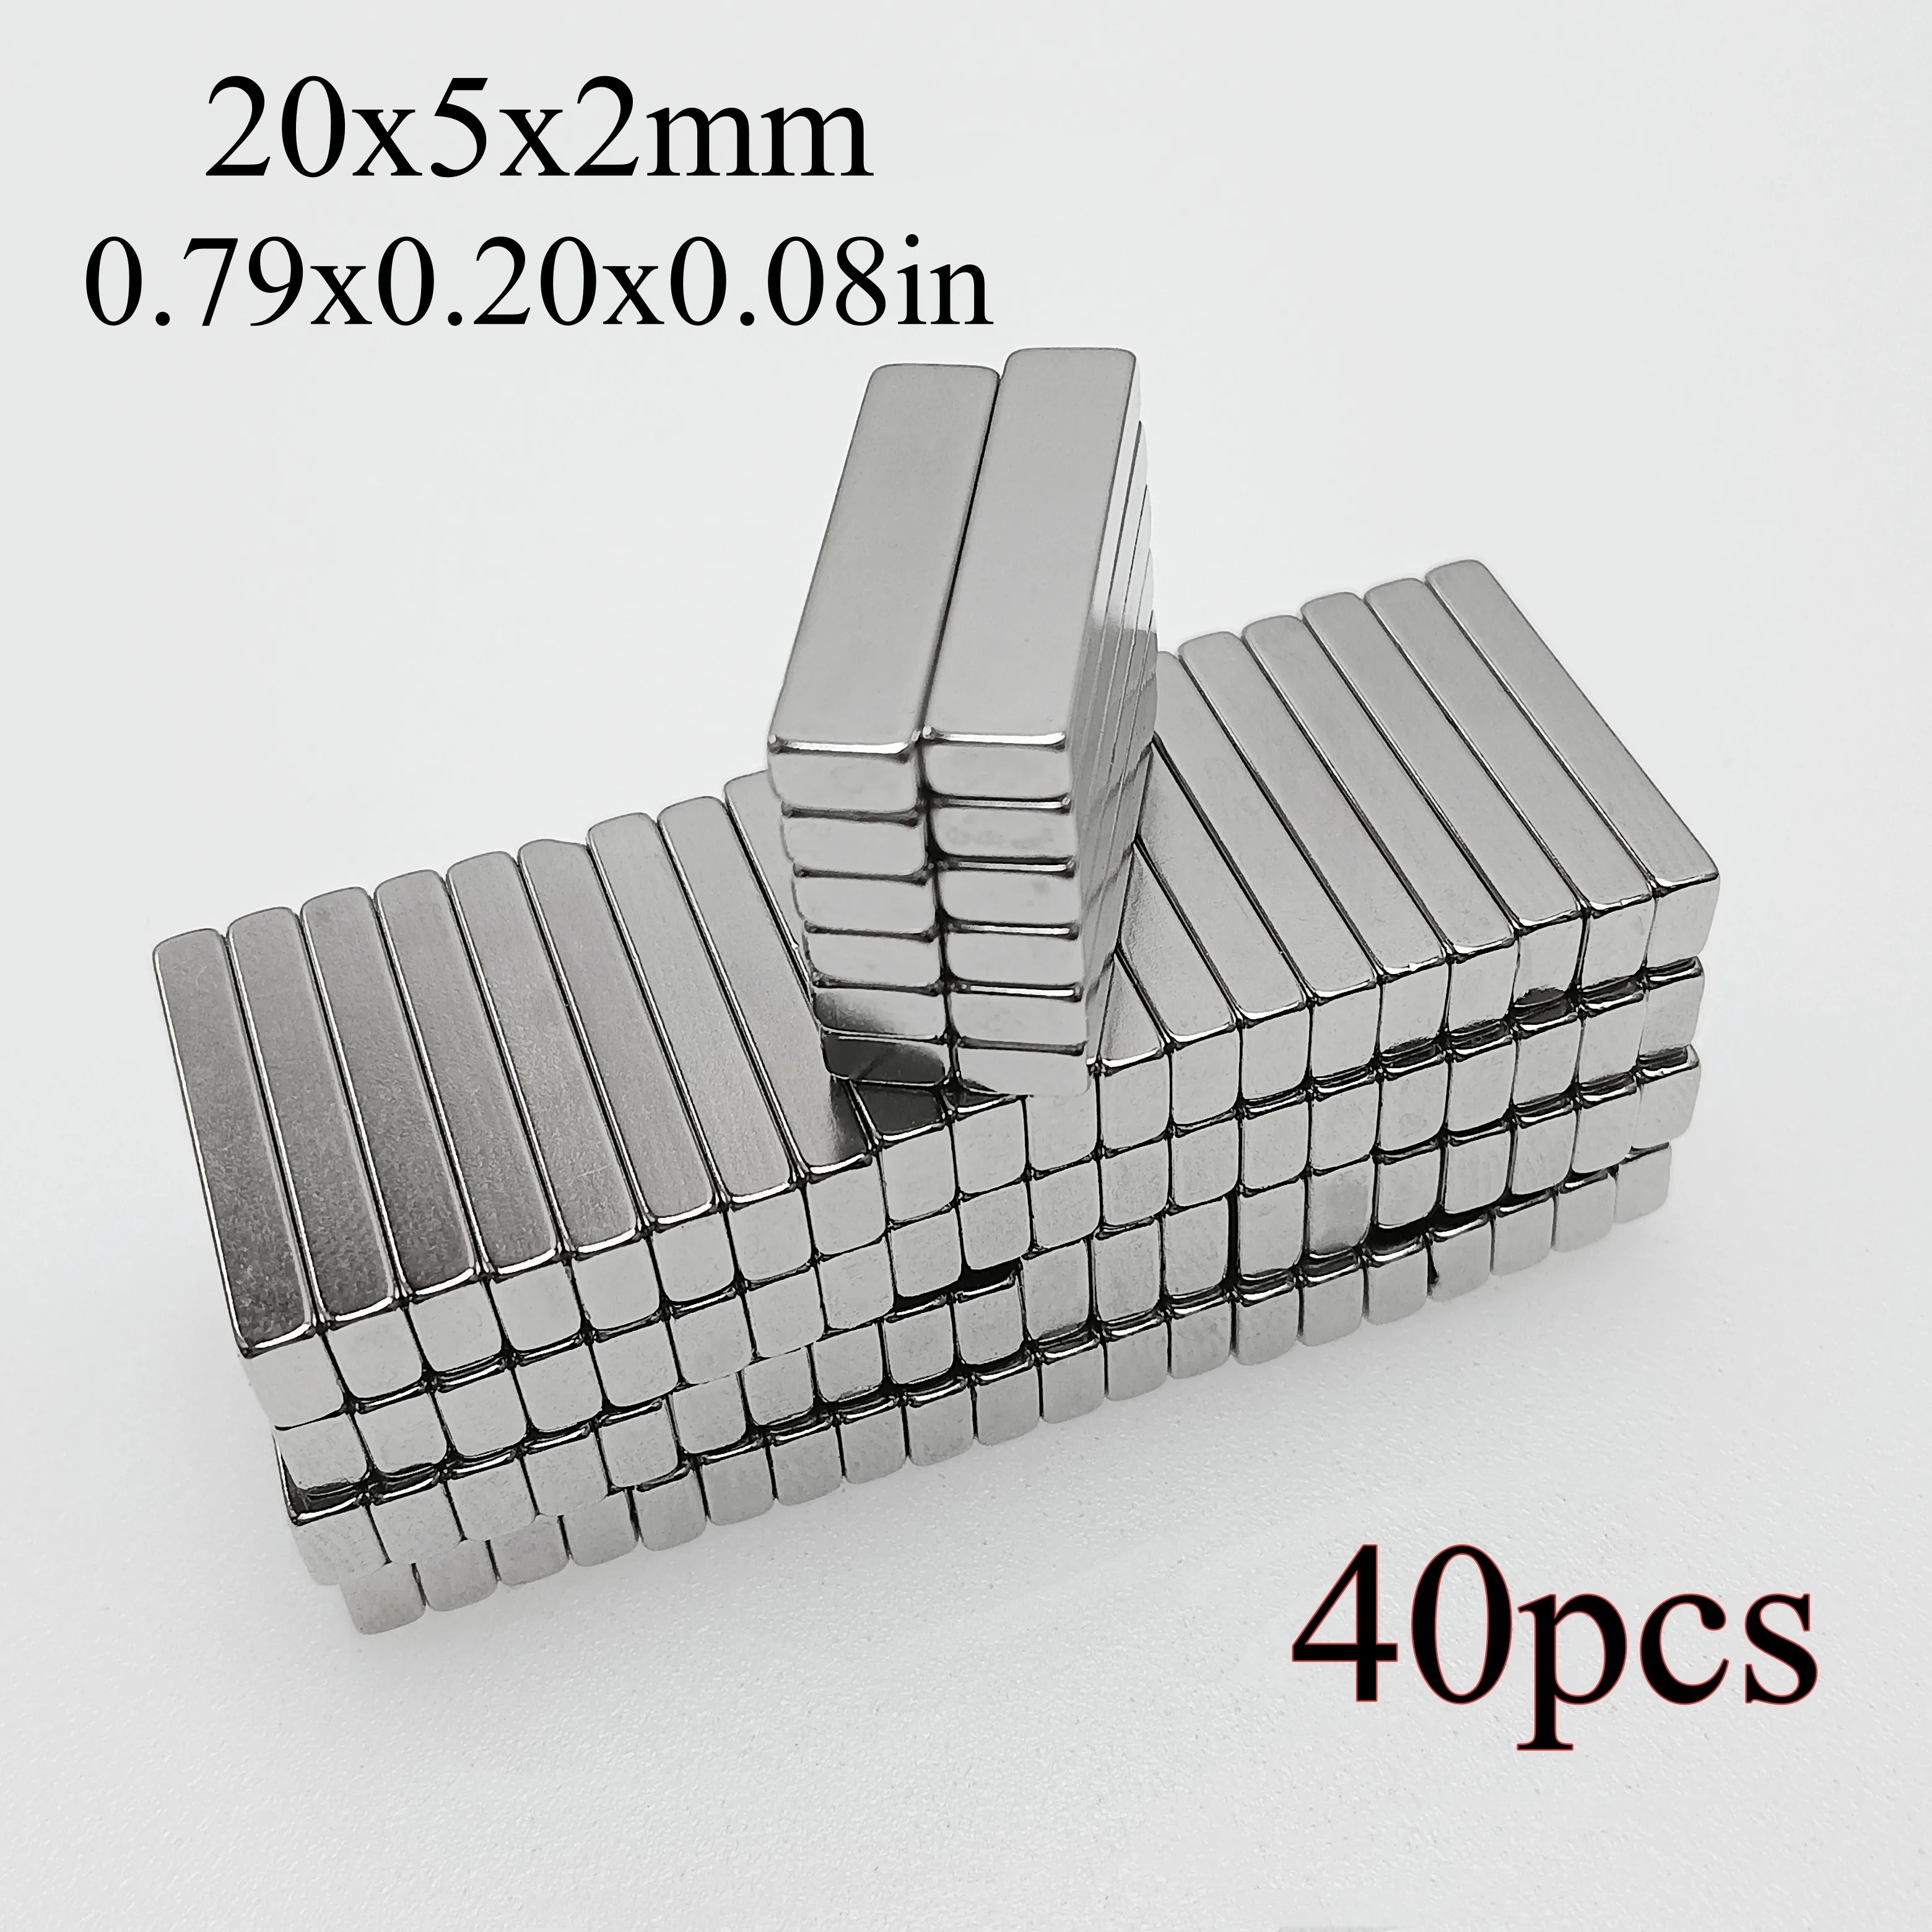 

40pcs 20x5x2mm Super Strong Neodymium Square Rare Earth Magnets, 20mm X 5mm X 2mm N35 Square Magnet For Tools